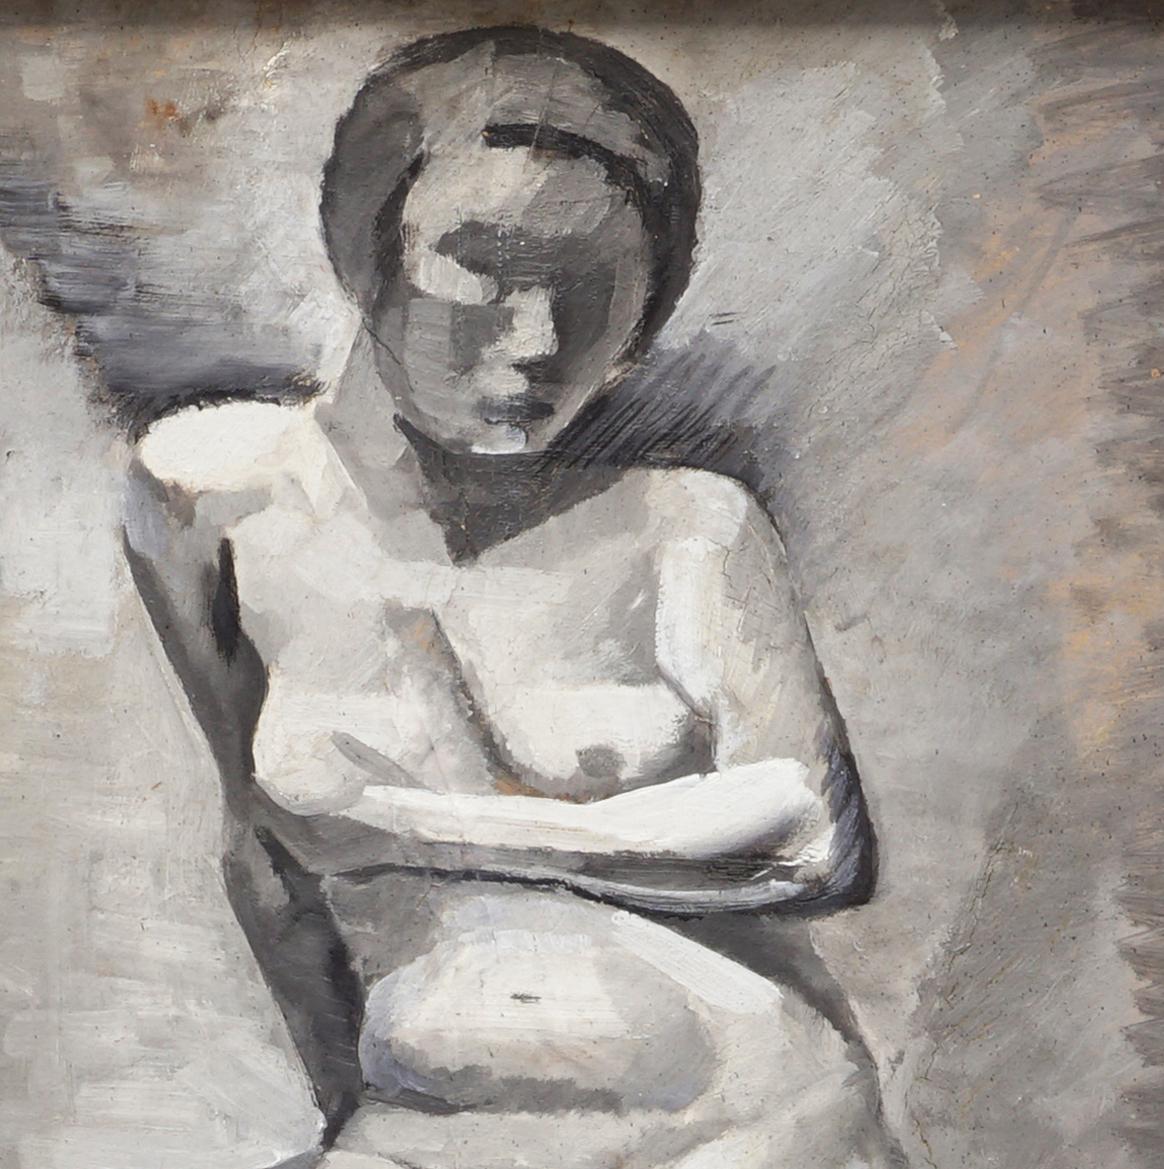 Cubist modern portrait of a young naked woman
Signed William Scharff, Paris 1921, oil on paper on canvas
William Scharff was one of the leading figures in Danish modernism
Measures without frame. With frame +10cm.